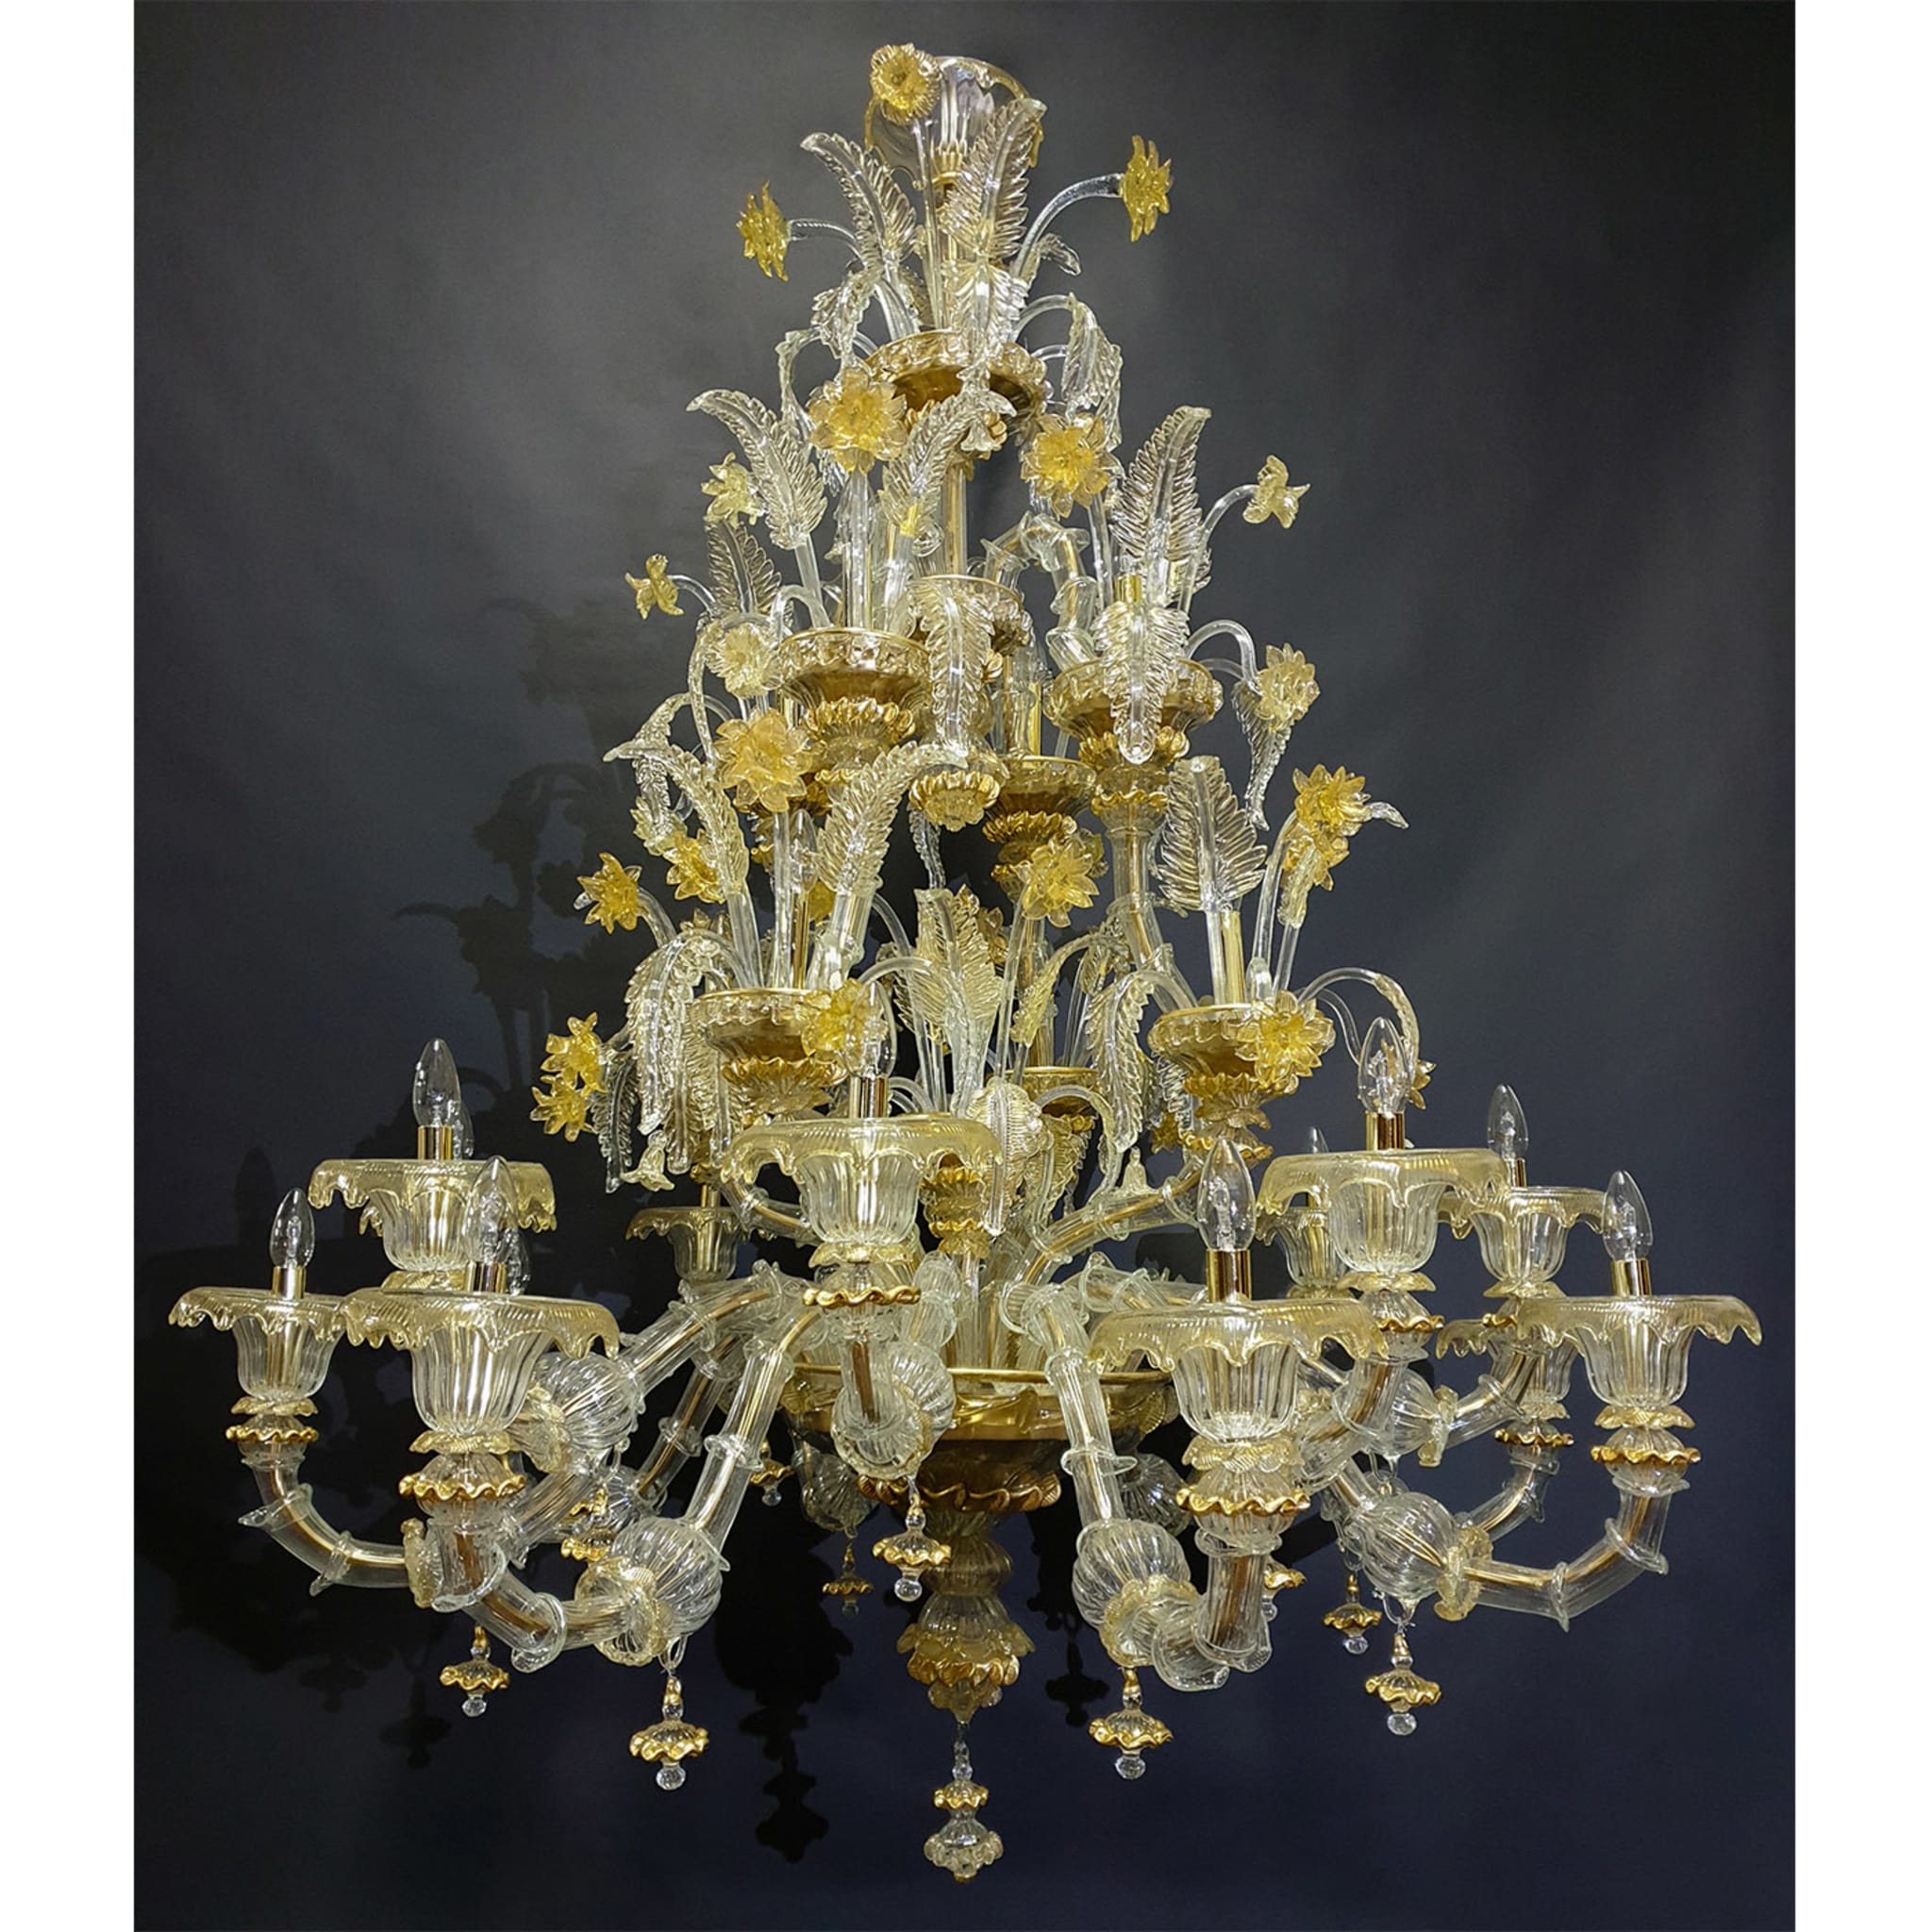 Rezzonico-style Gold and Crystal Chandelier #3 - Alternative view 5